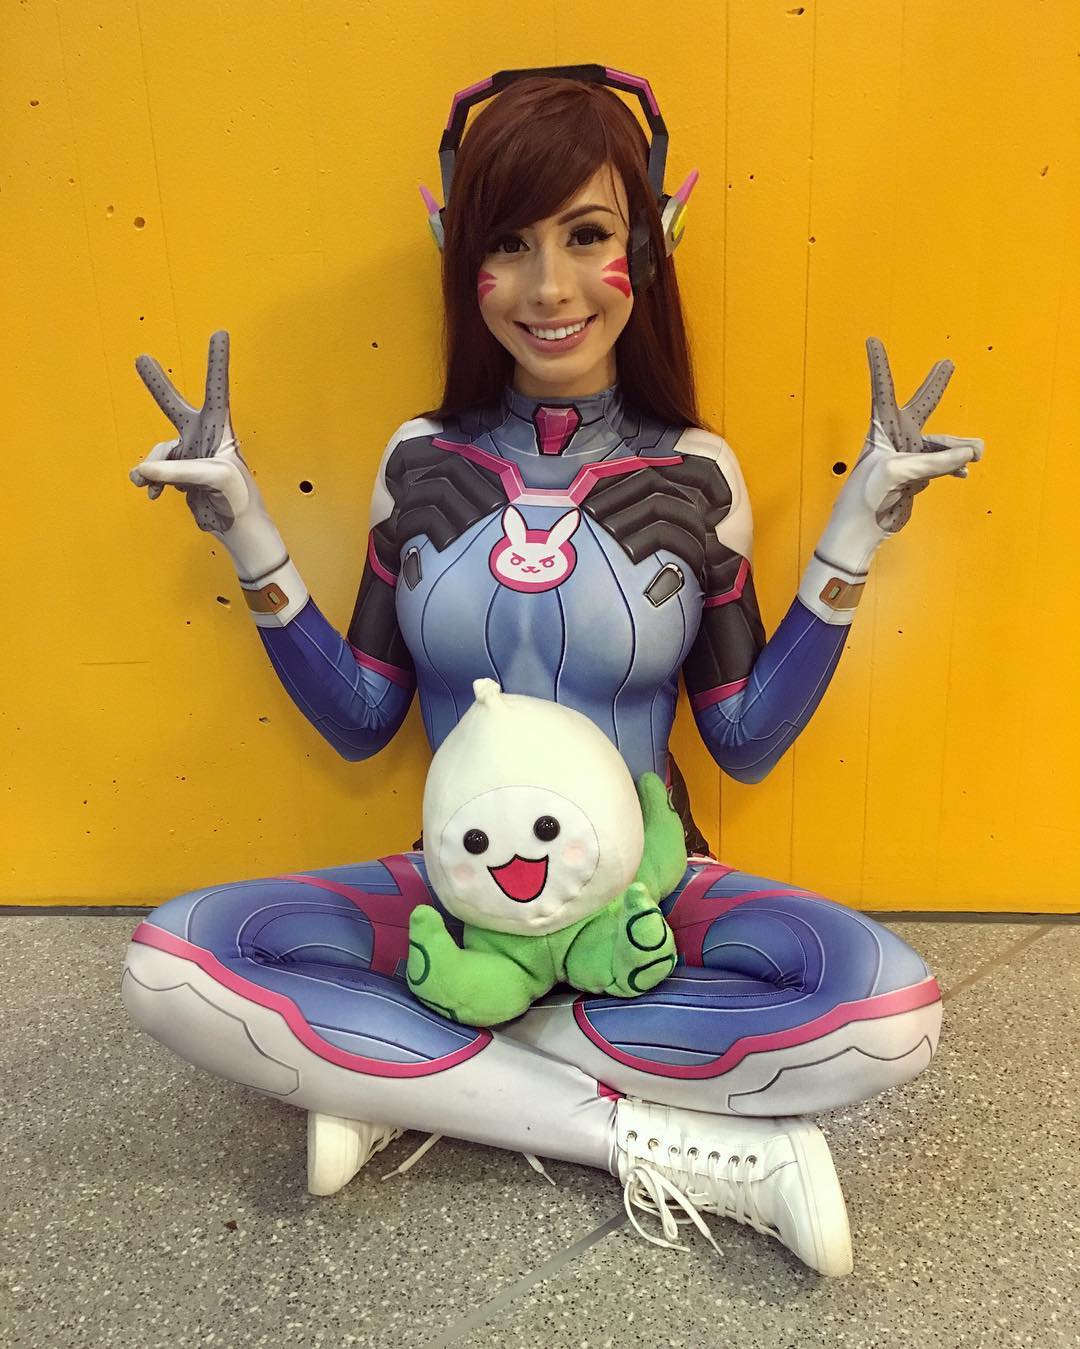 Comic book and video game cosplay of Elise Laurenne, D.Va from Overwatch